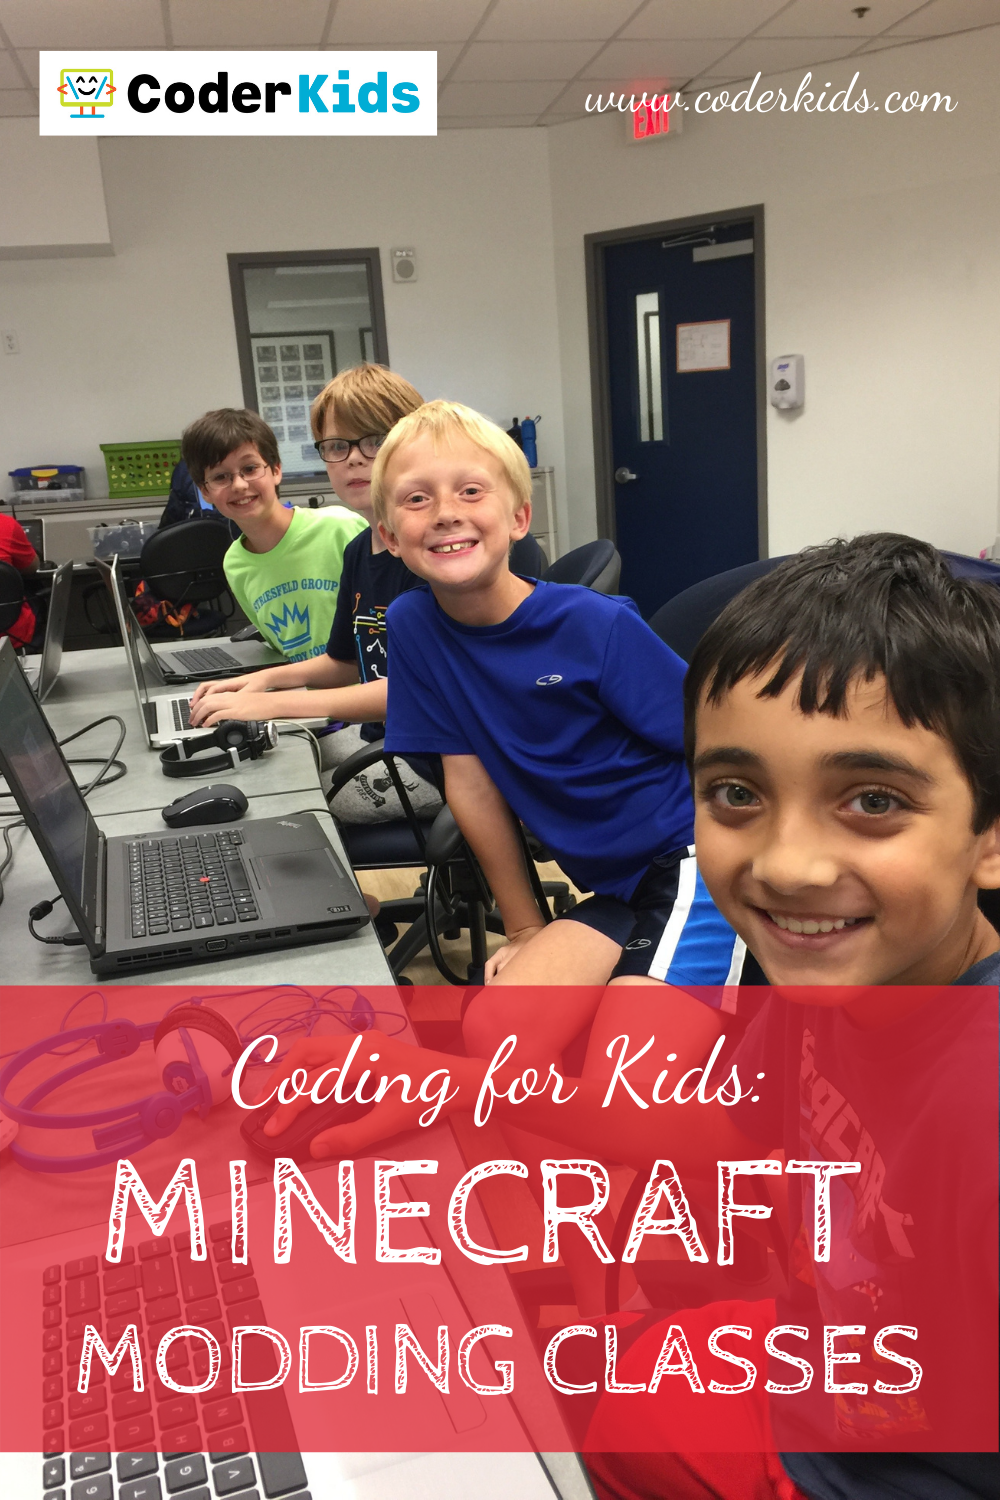 Simply Coding for Kids Minecraft Code Course – Minecraft Mods in